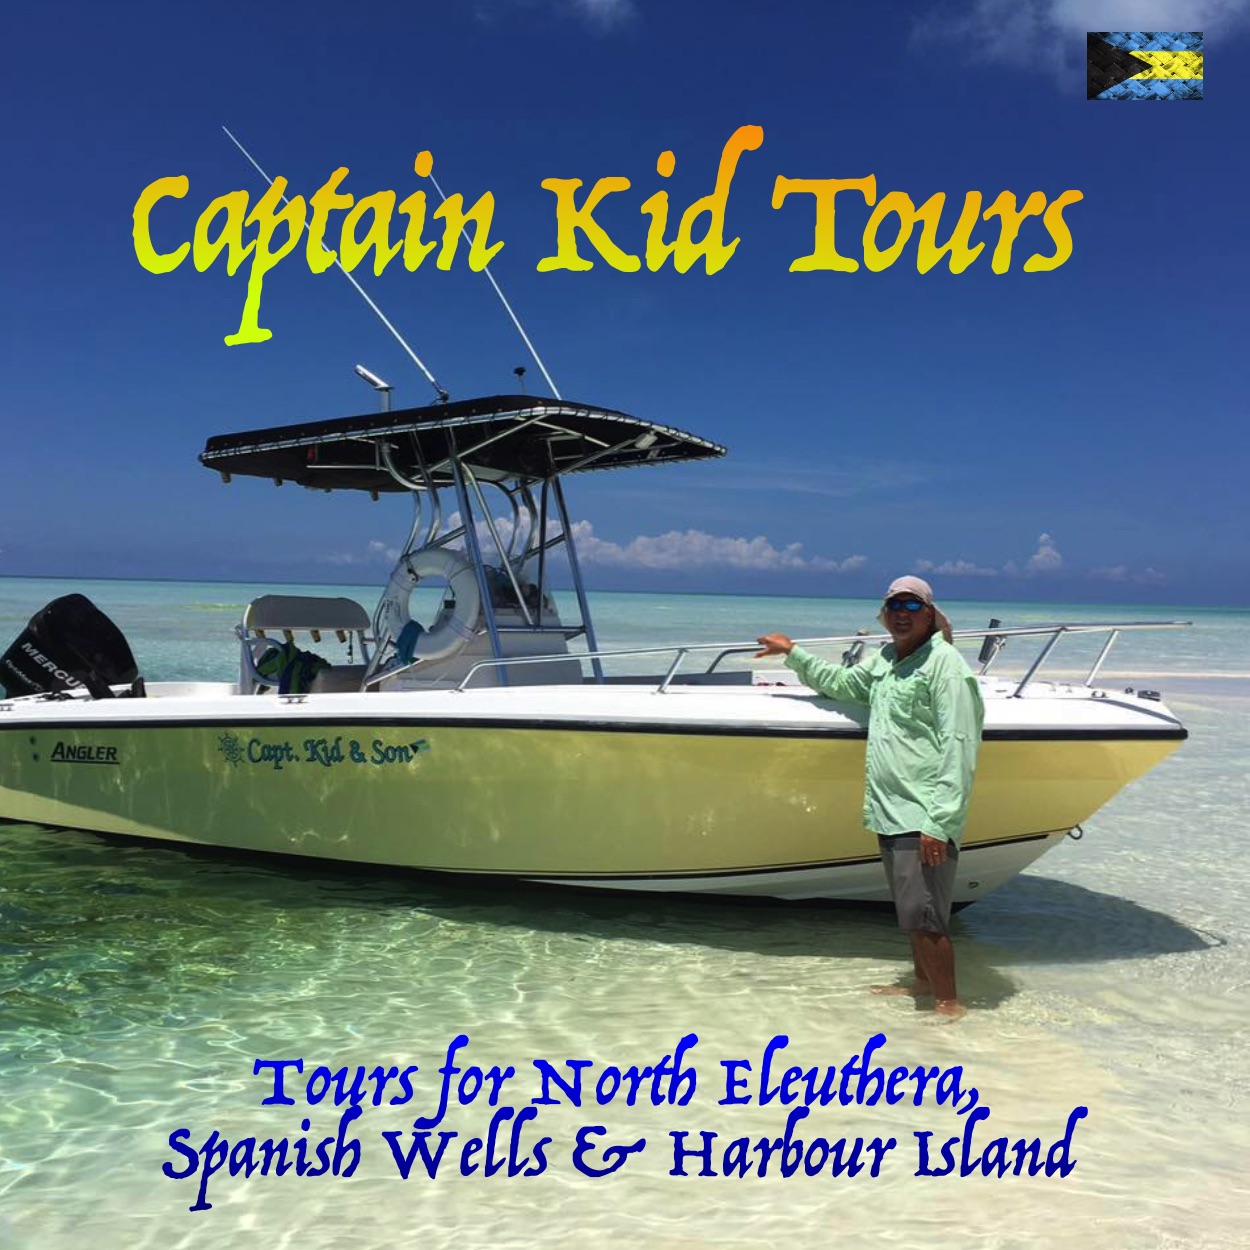 Captain Kid Tours, If you are Looking for Things to Do on Eleuthera Bahamas, you've come to the right place.